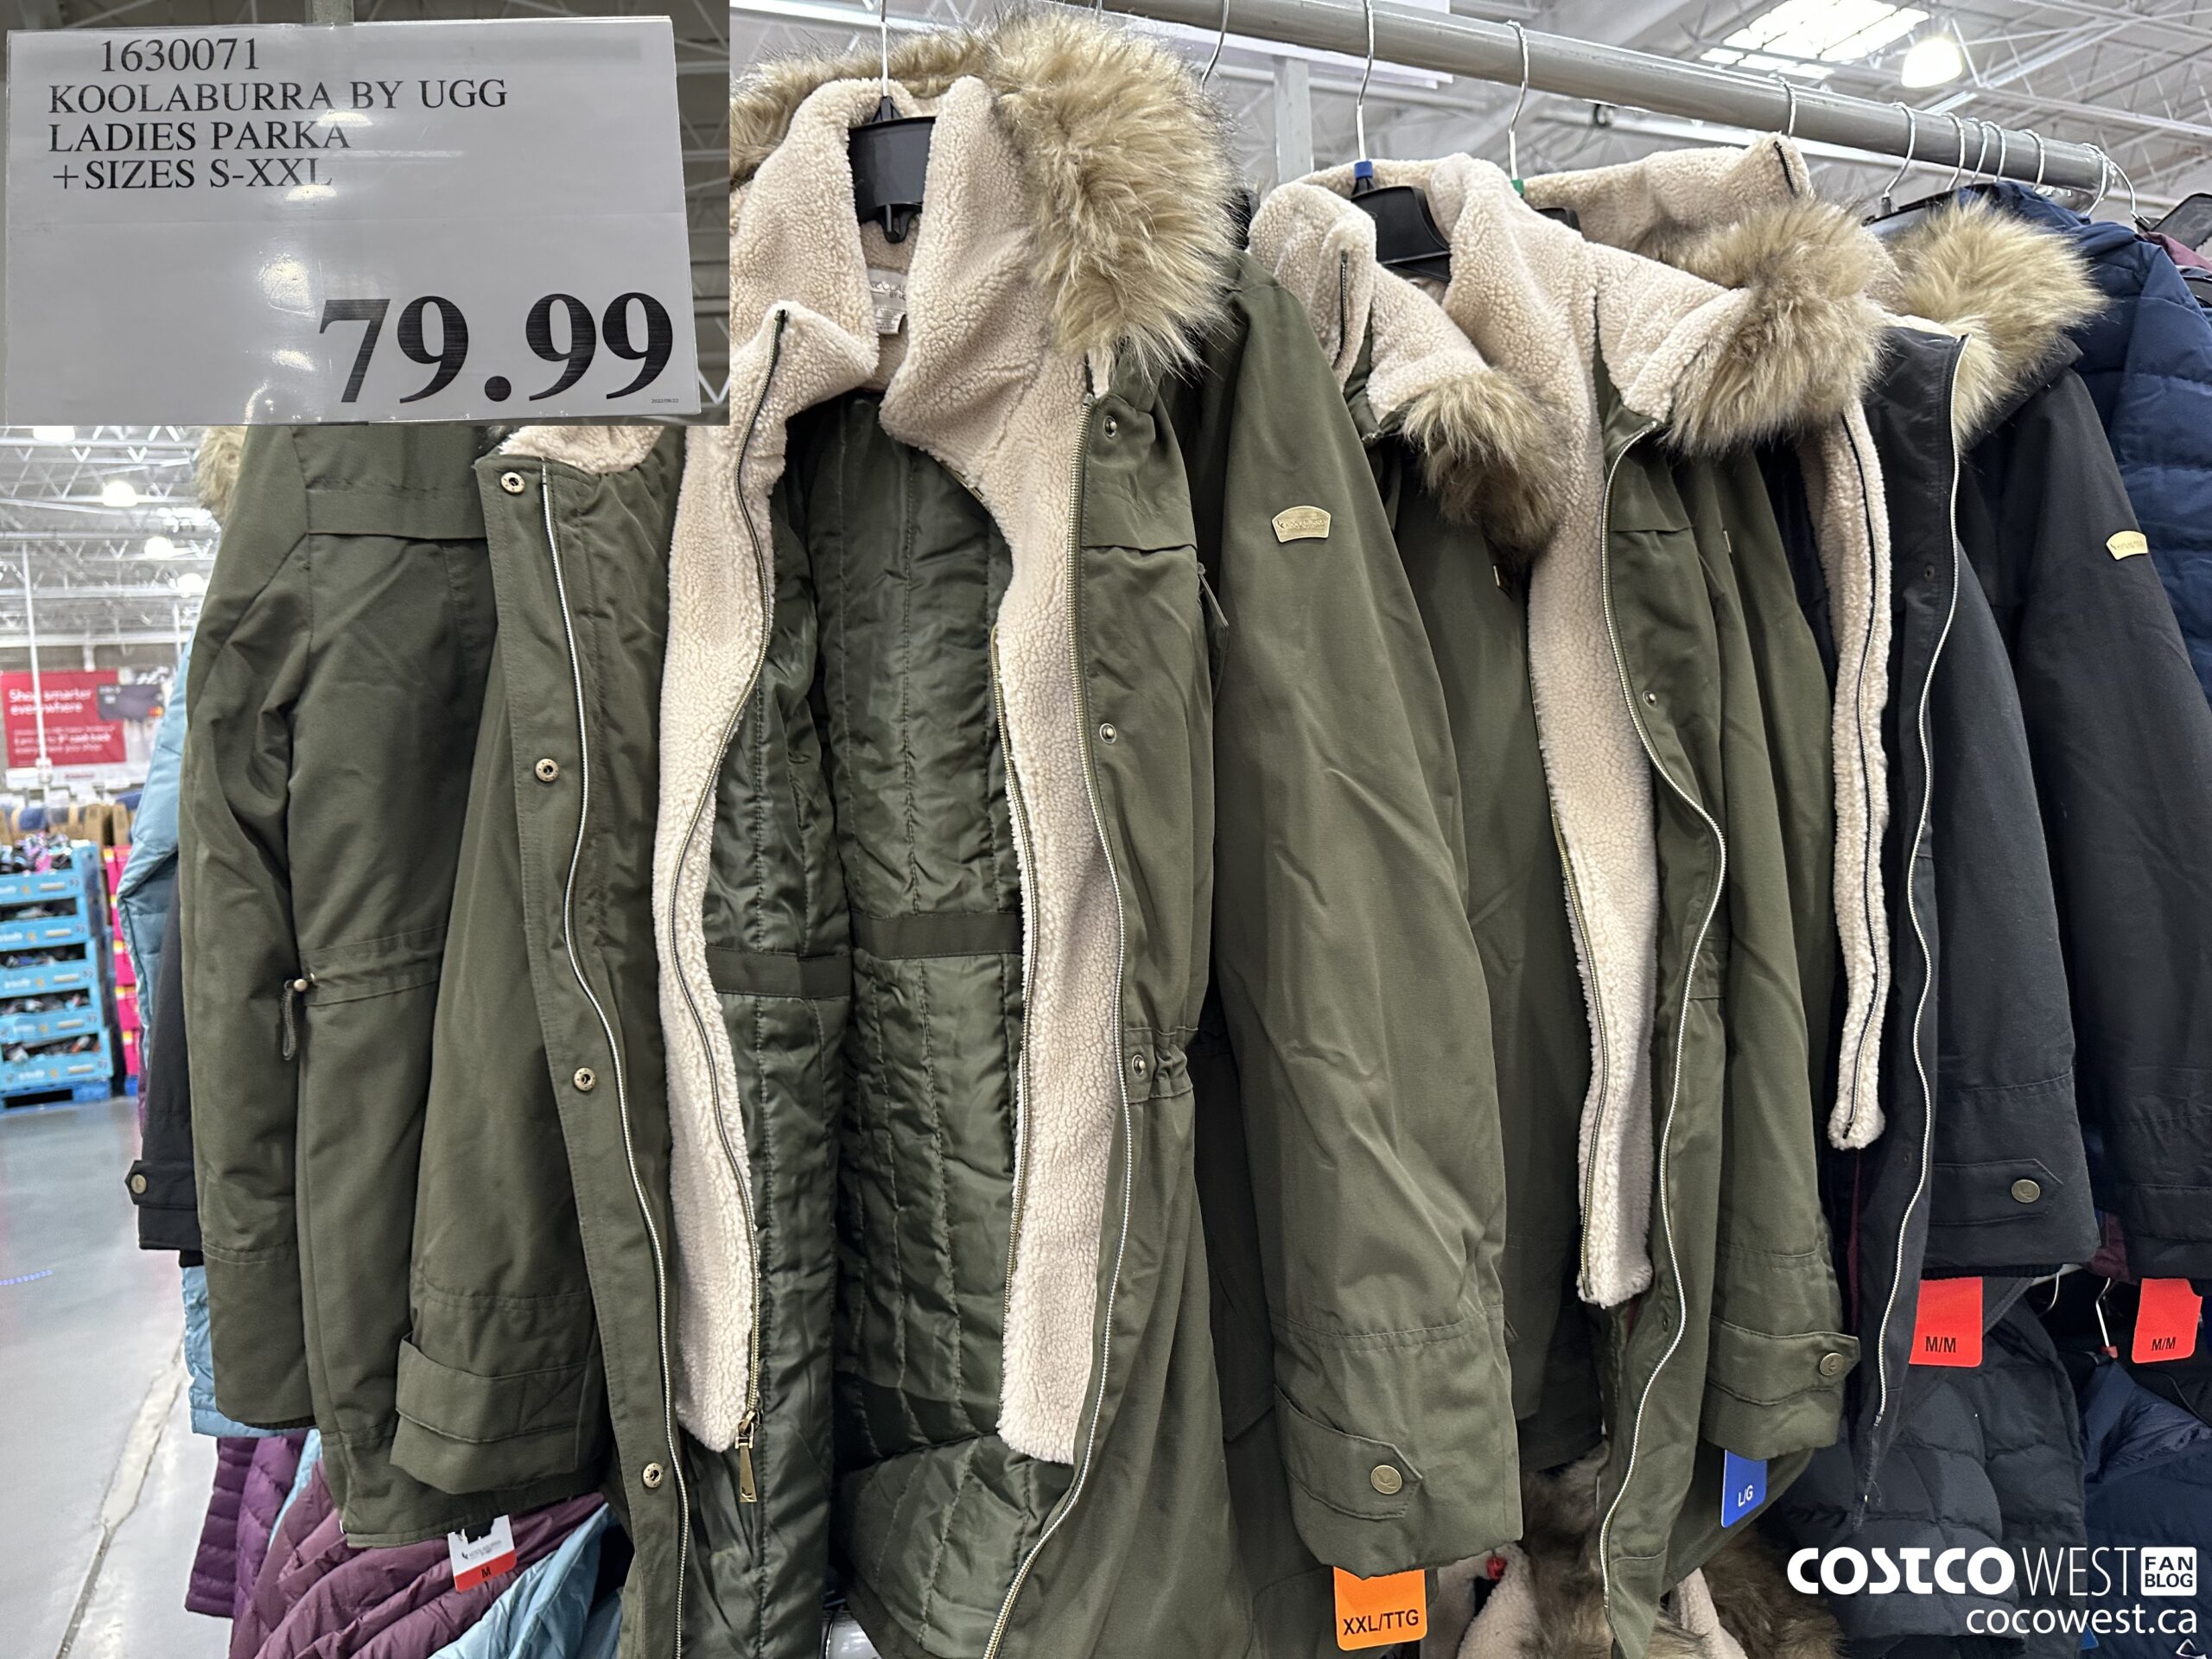 Costco Fall 2022 Superpost – The Entire Clothing Section! - Costco West Fan